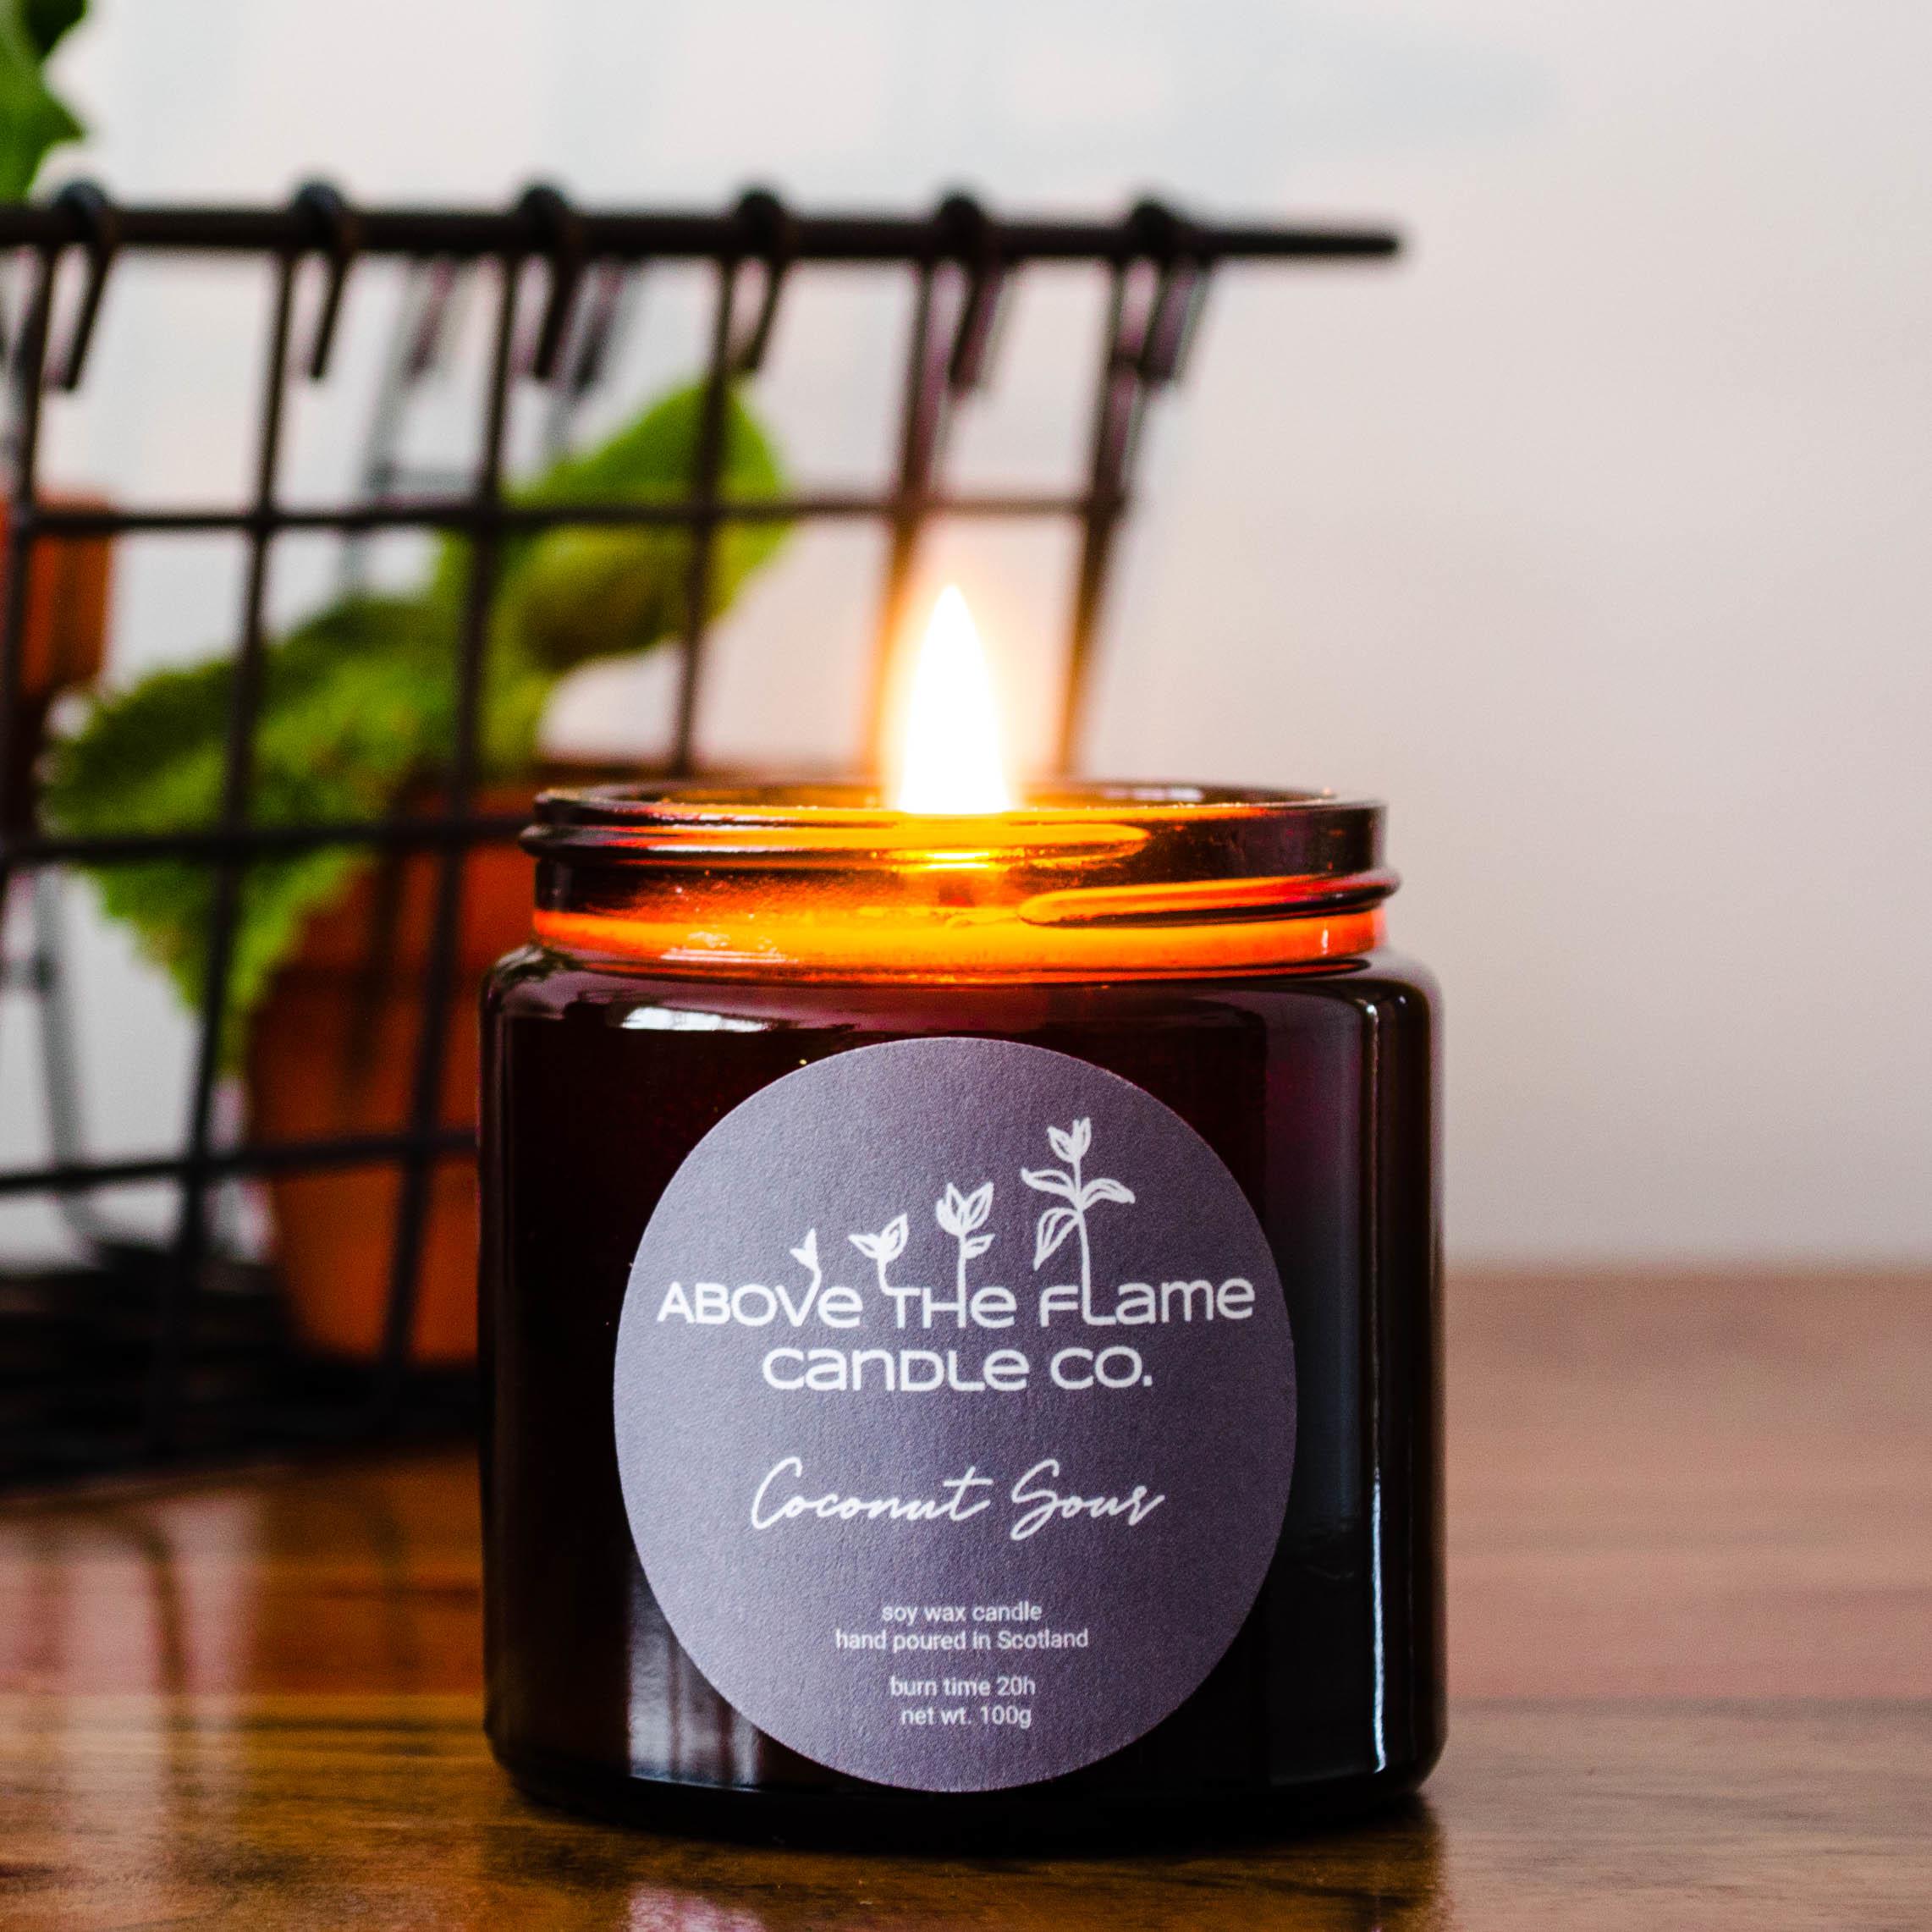 A lit coconut sour amber soy wax candle jar handmade by above the flame candle Co on a wooden table